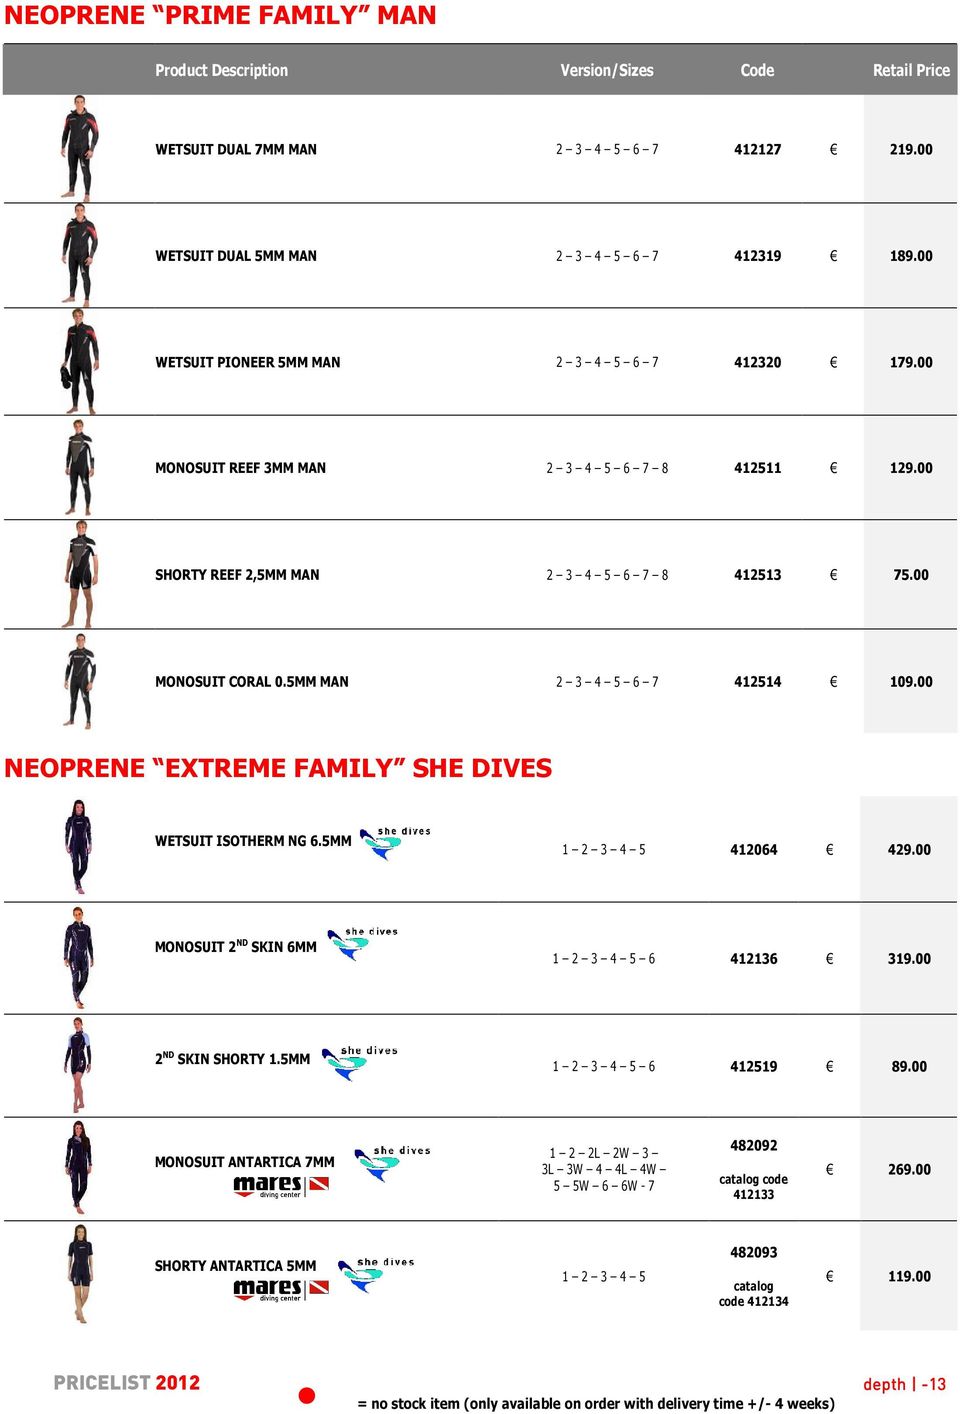 5MM MAN 2 3 4 5 6 7 412514 109.00 NEOPRENE EXTREME FAMILY SHE DIVES WETSUIT ISOTHERM NG 6.5MM 1 2 3 4 5 412064 429.00 MONOSUIT 2 ND SKIN 6MM 1 2 3 4 5 6 412136 319.